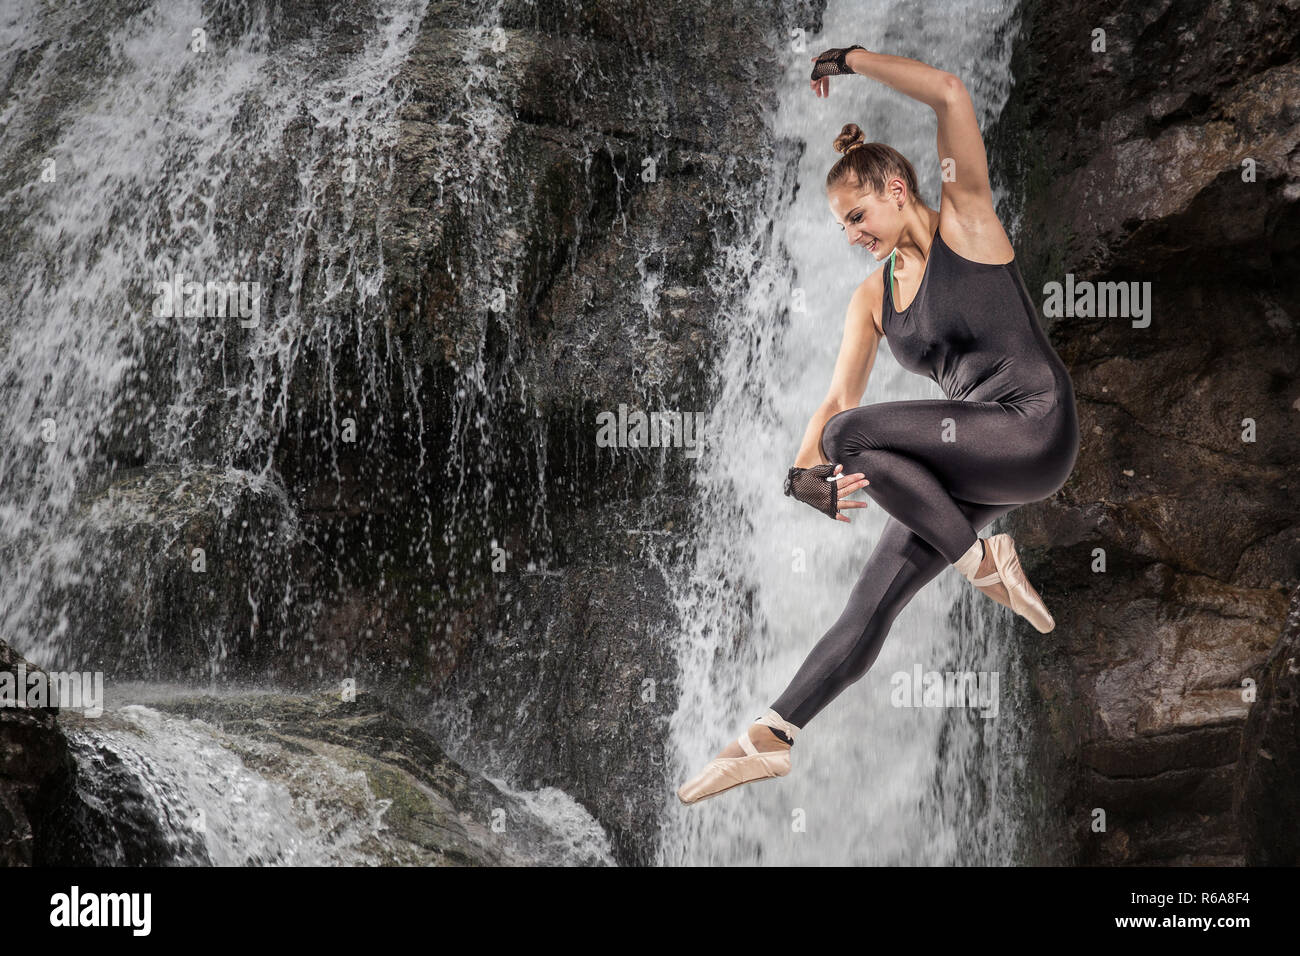 Photomontage Of A Young Woman Jumping Over A Waterfall Stock Photo